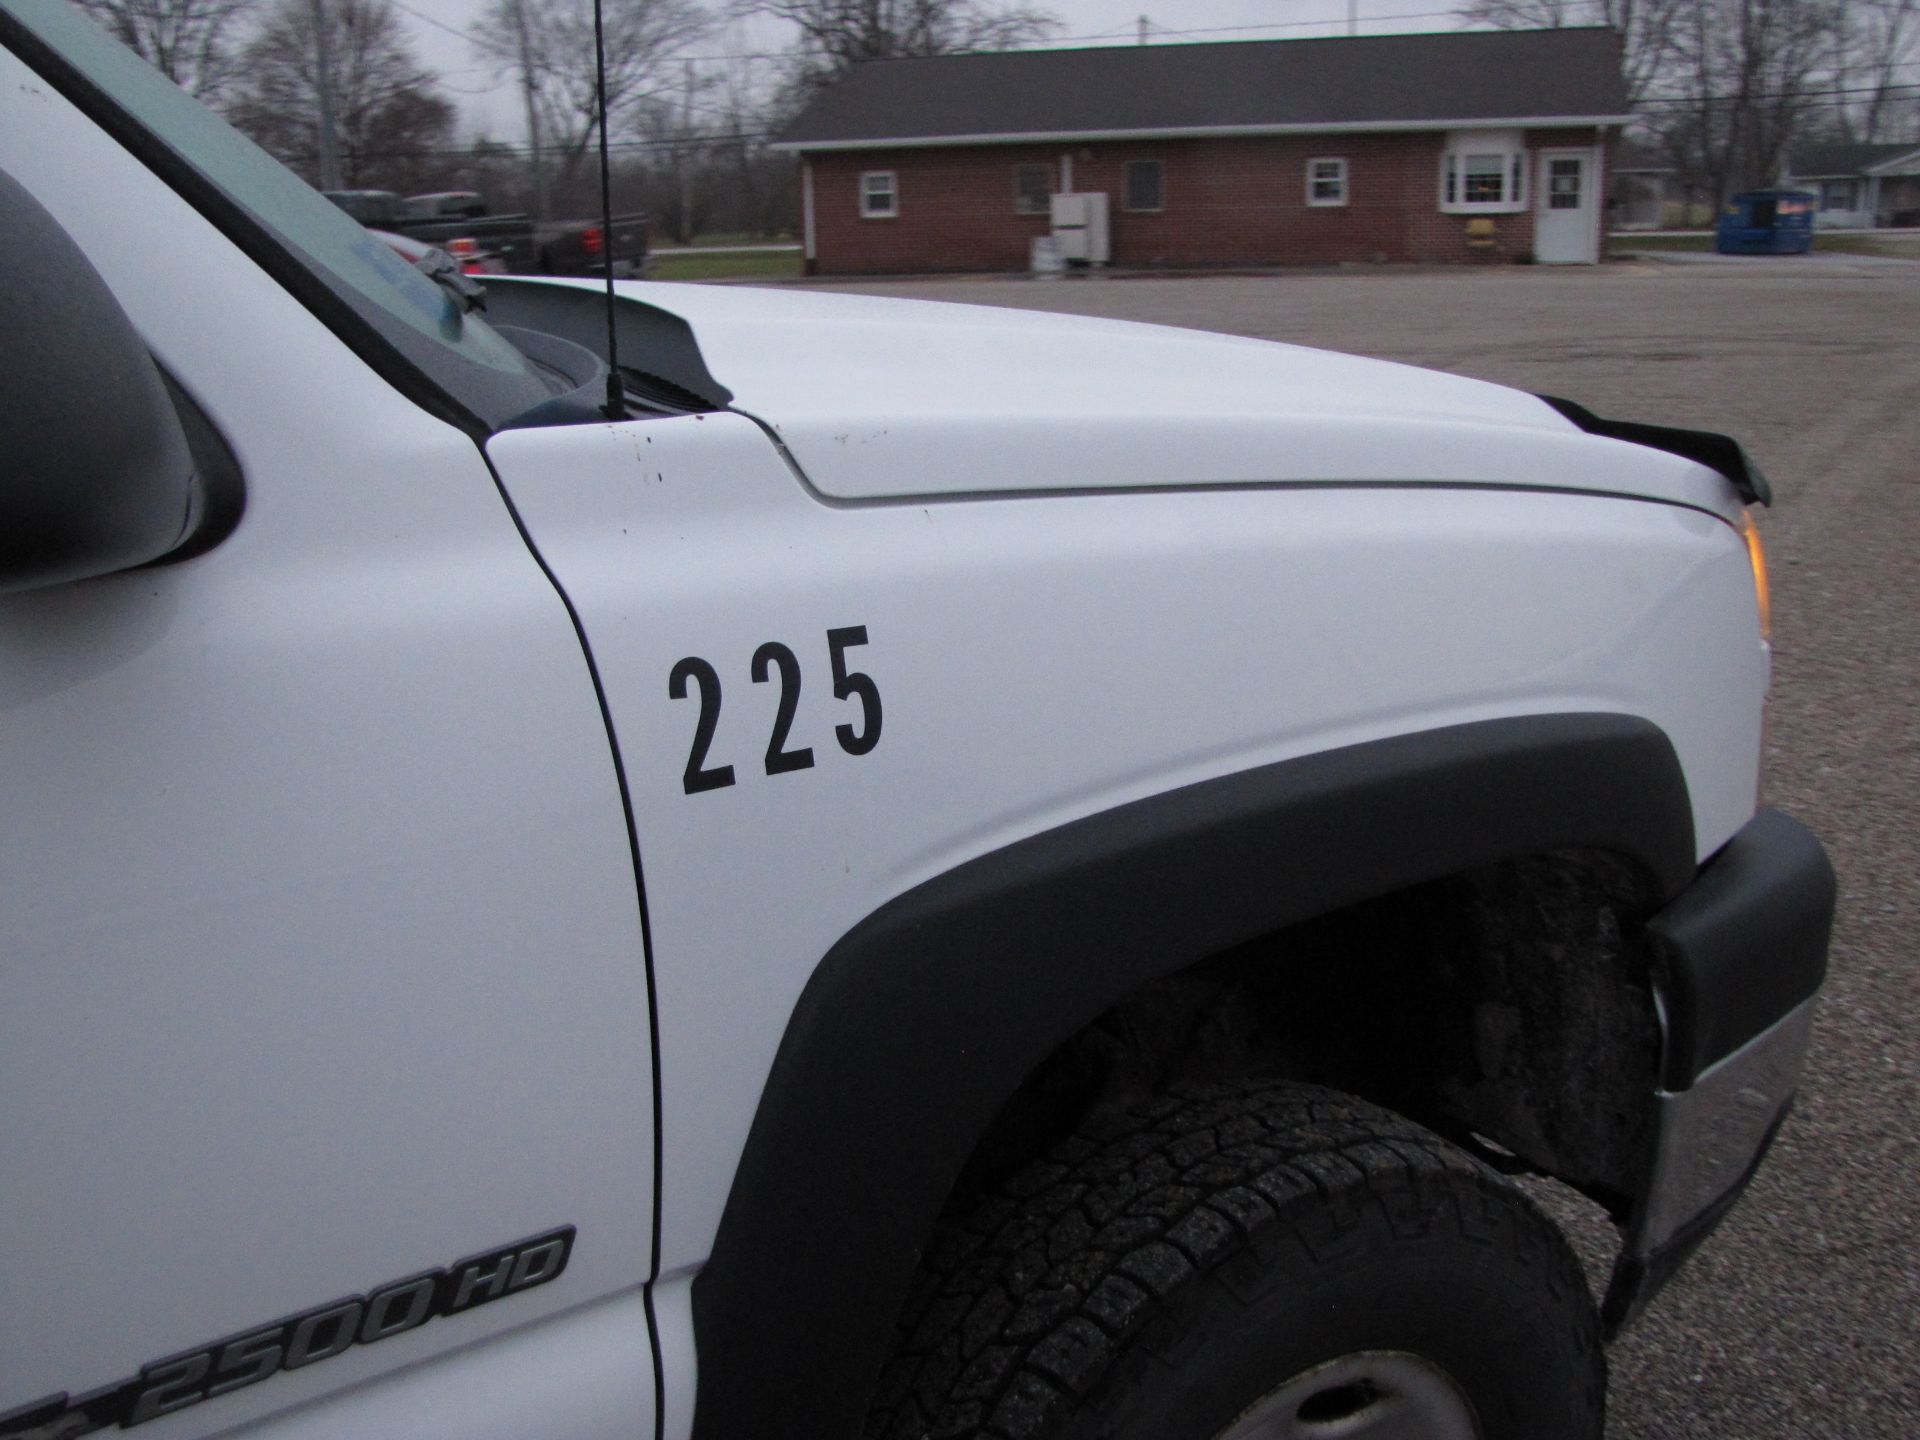 2006 Chevy 2500 HD pickup truck - Image 44 of 65